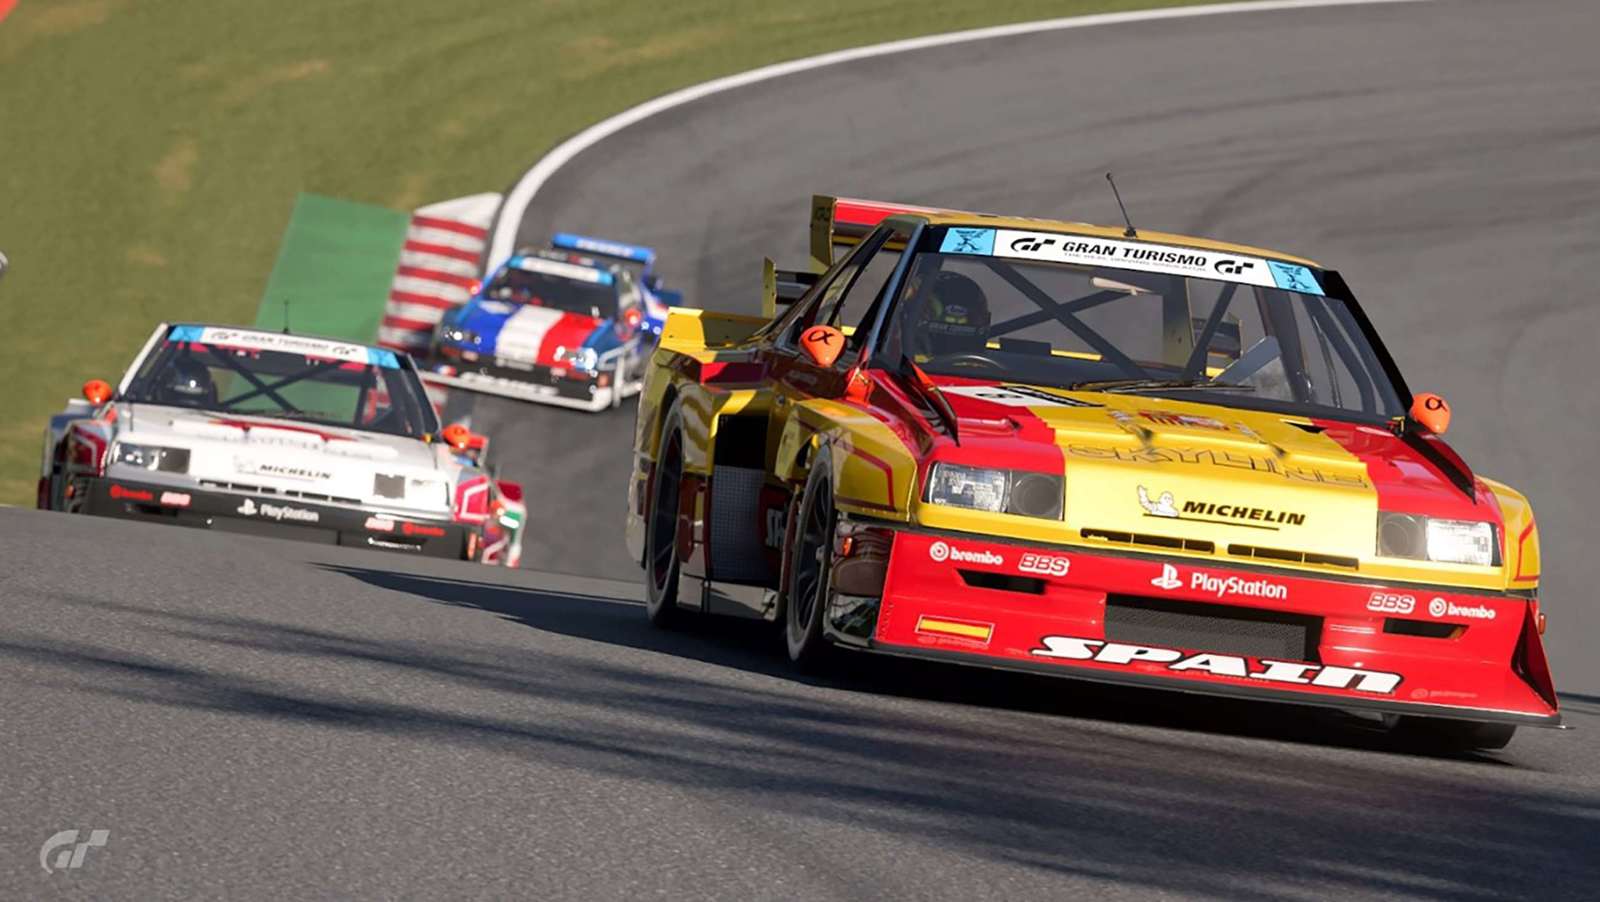 Gran Turismo Nations Cup returns to Spa